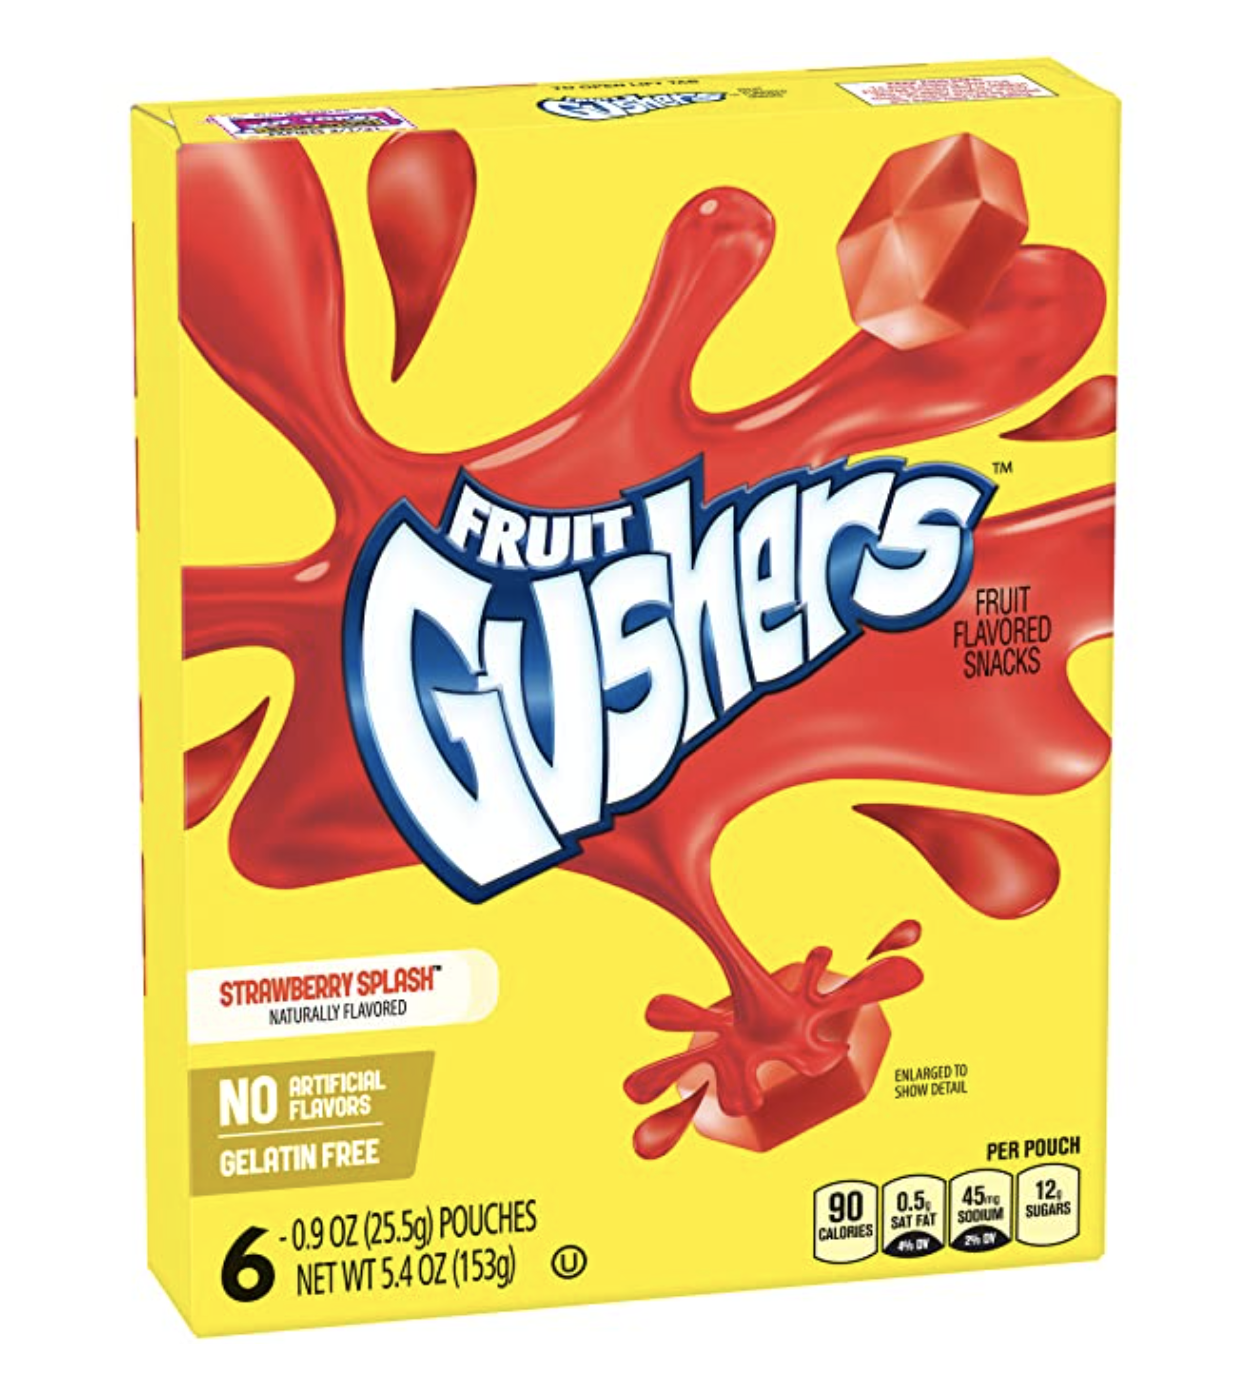 A box of Fruit Gushers